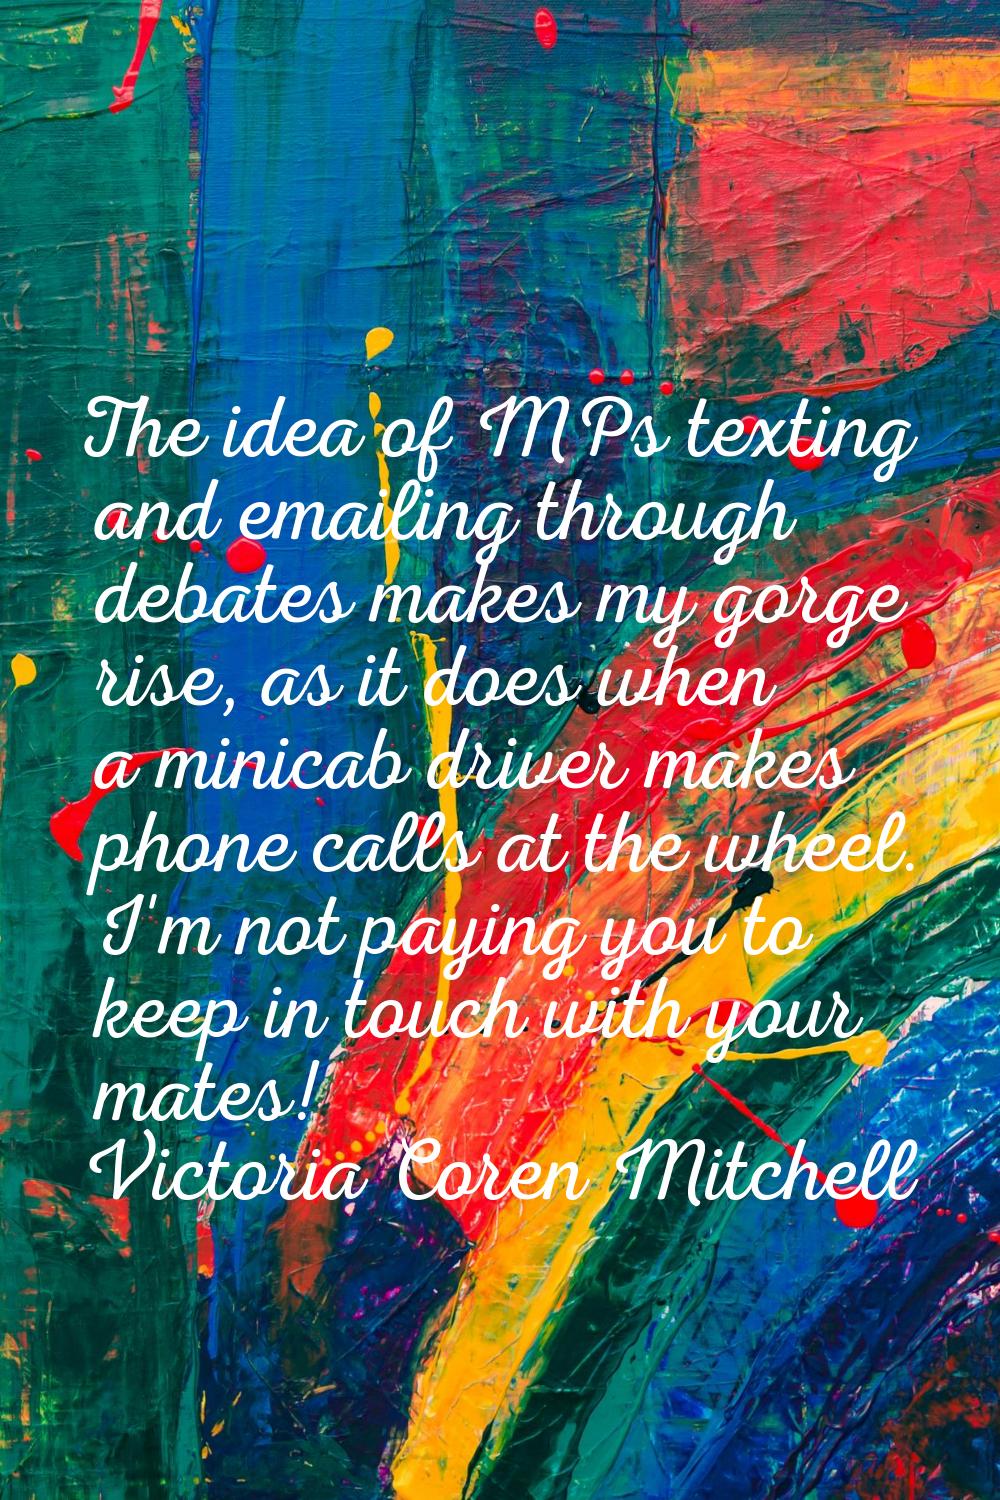 The idea of MPs texting and emailing through debates makes my gorge rise, as it does when a minicab